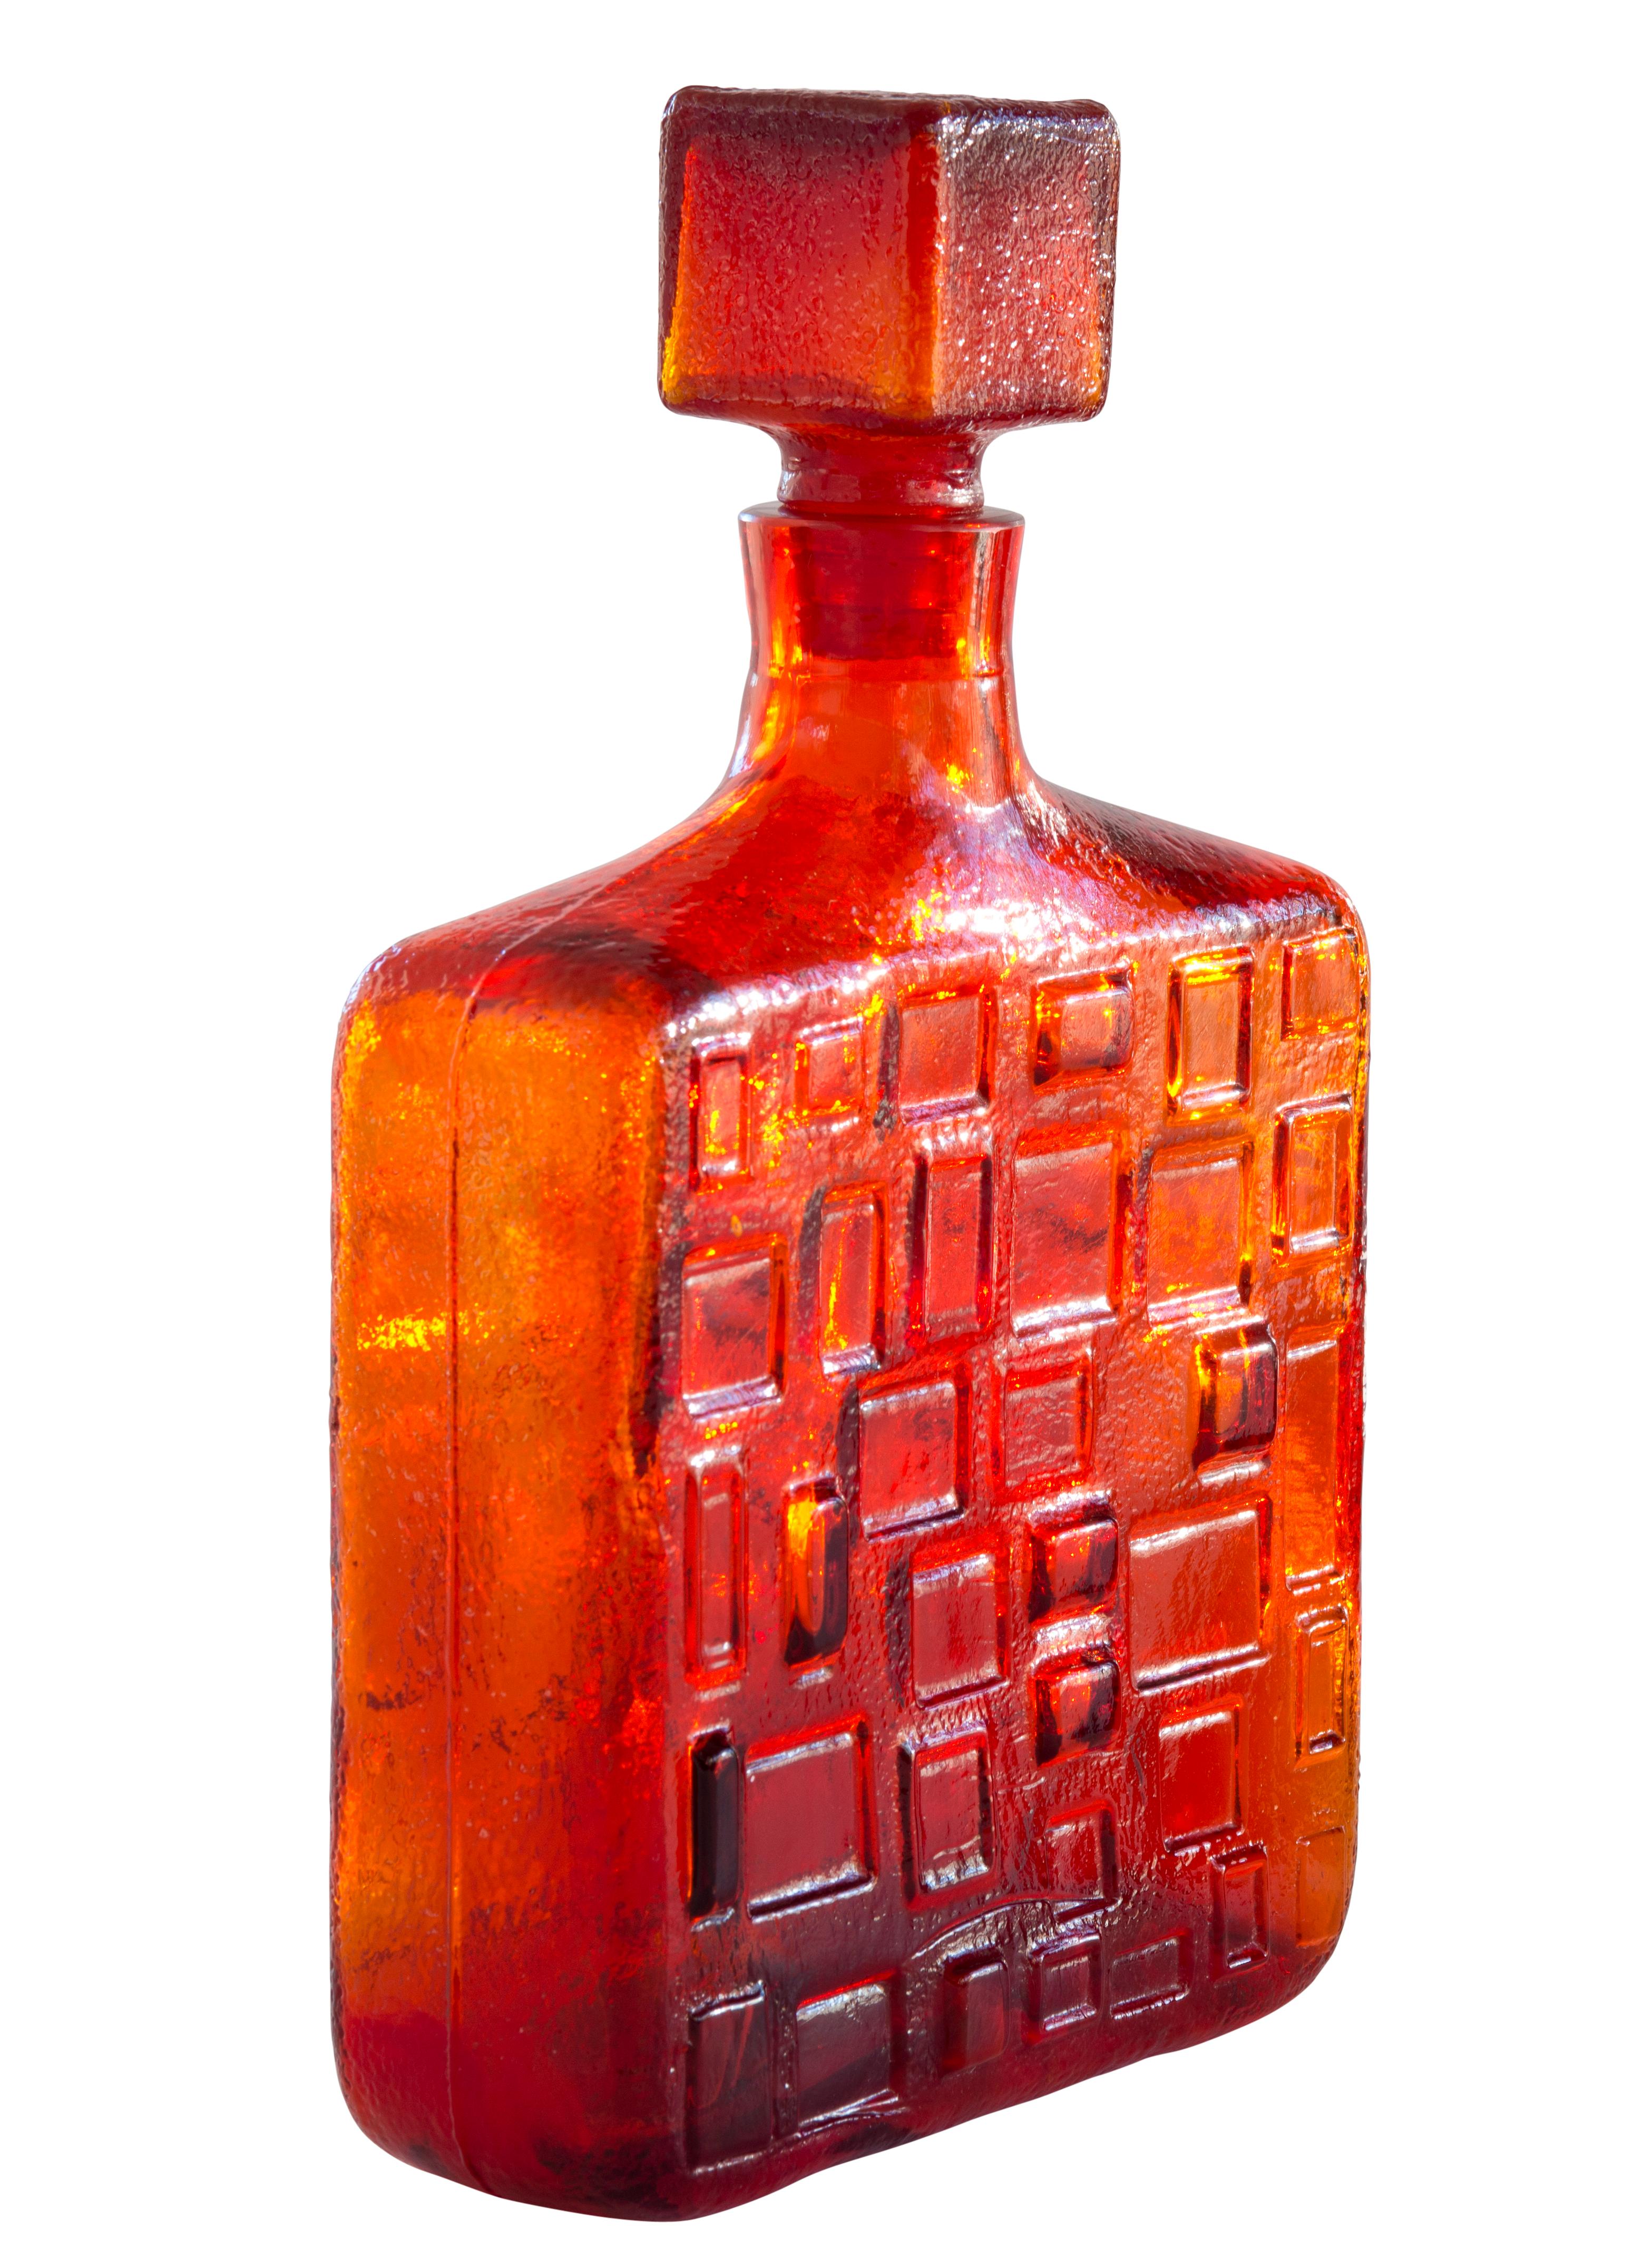 Empoli pressed glass decanter in vibrant fire orange, made in Italy, circa 1960. 

The Empoli region, on the west side of Italy, has been producing and exporting glass since the 14th century.